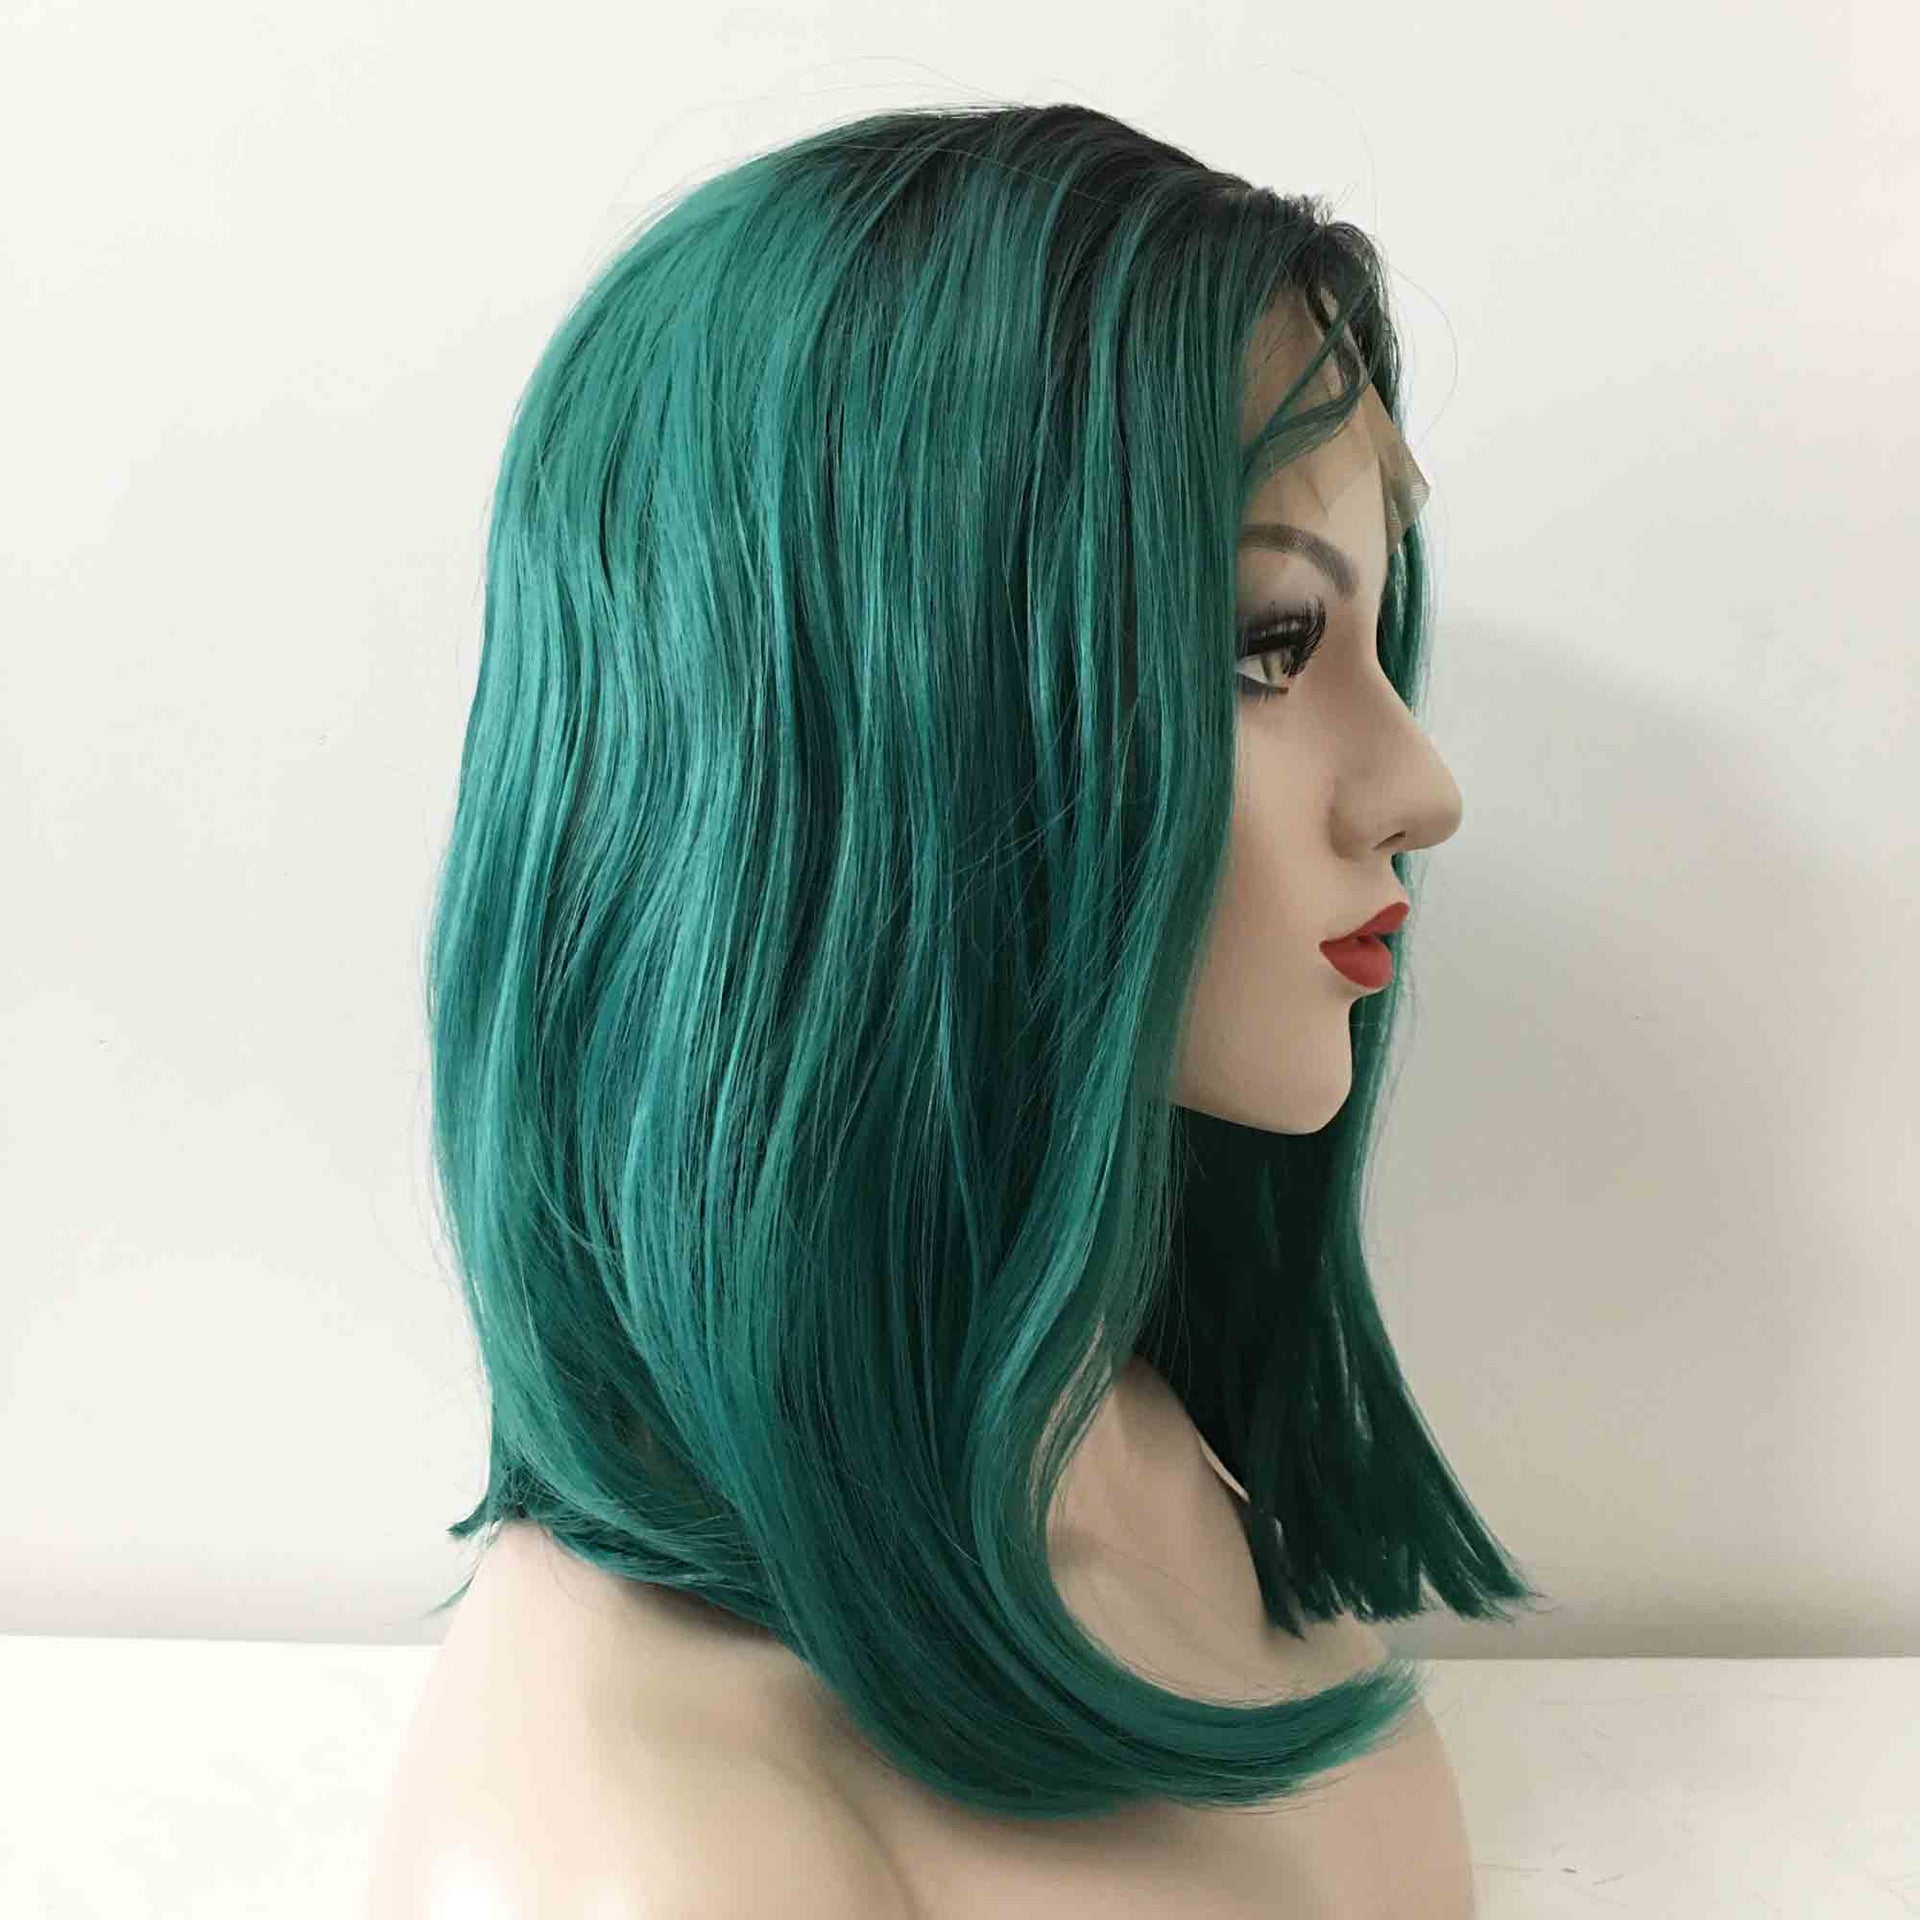 nevermindyrhead Women Green Dark Root Lace Front Medium Length Straight Middle Part Wig